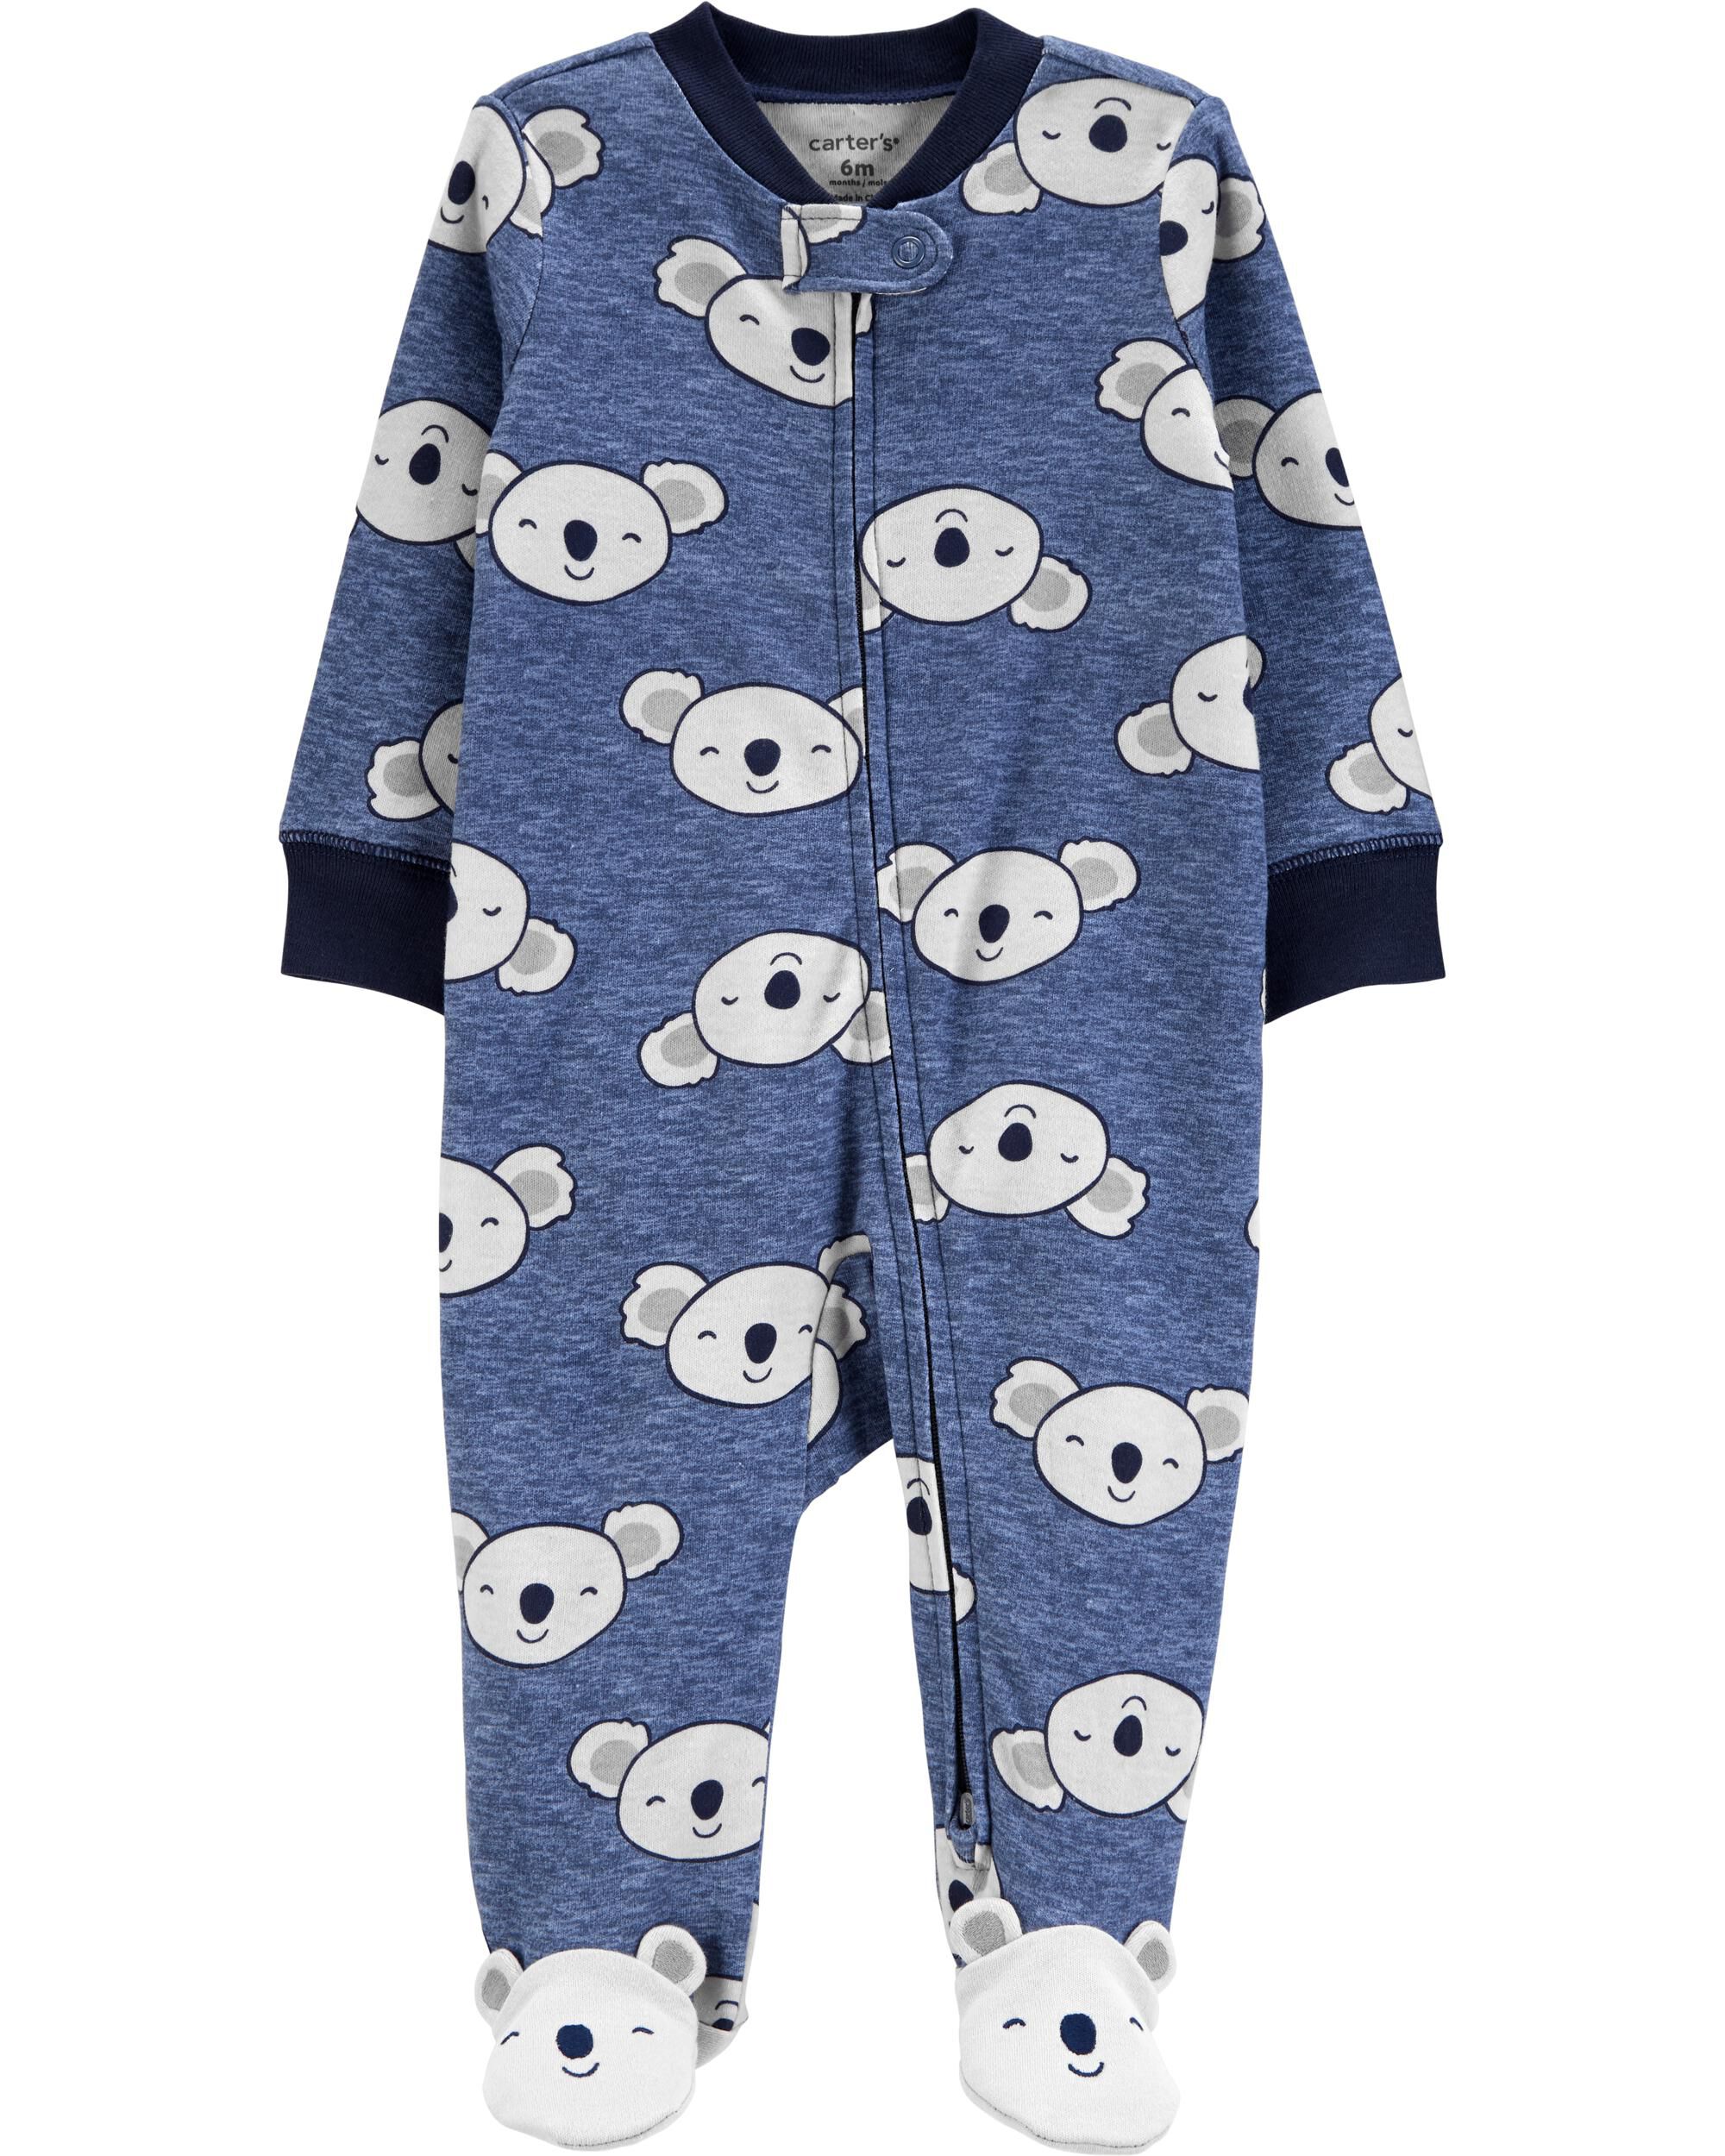 9 Months Carters Baby Boys Graphic Two Fer Polar Bear